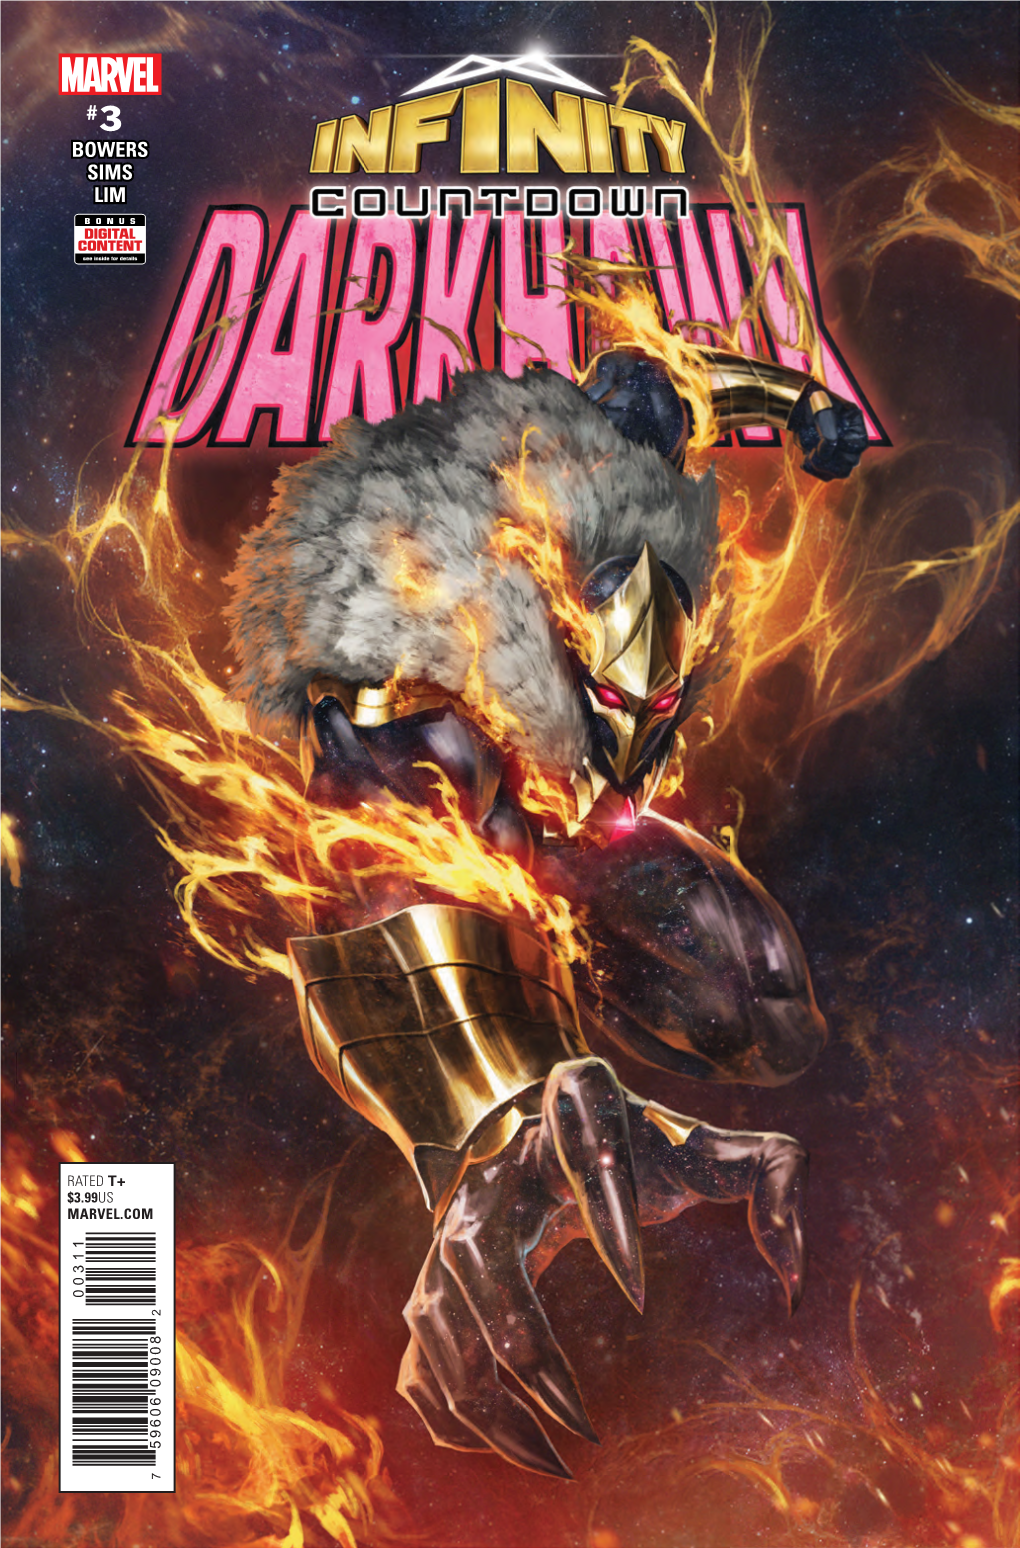 Read the Preview of INFINITY COUNTDOWN DARKHAWK #3